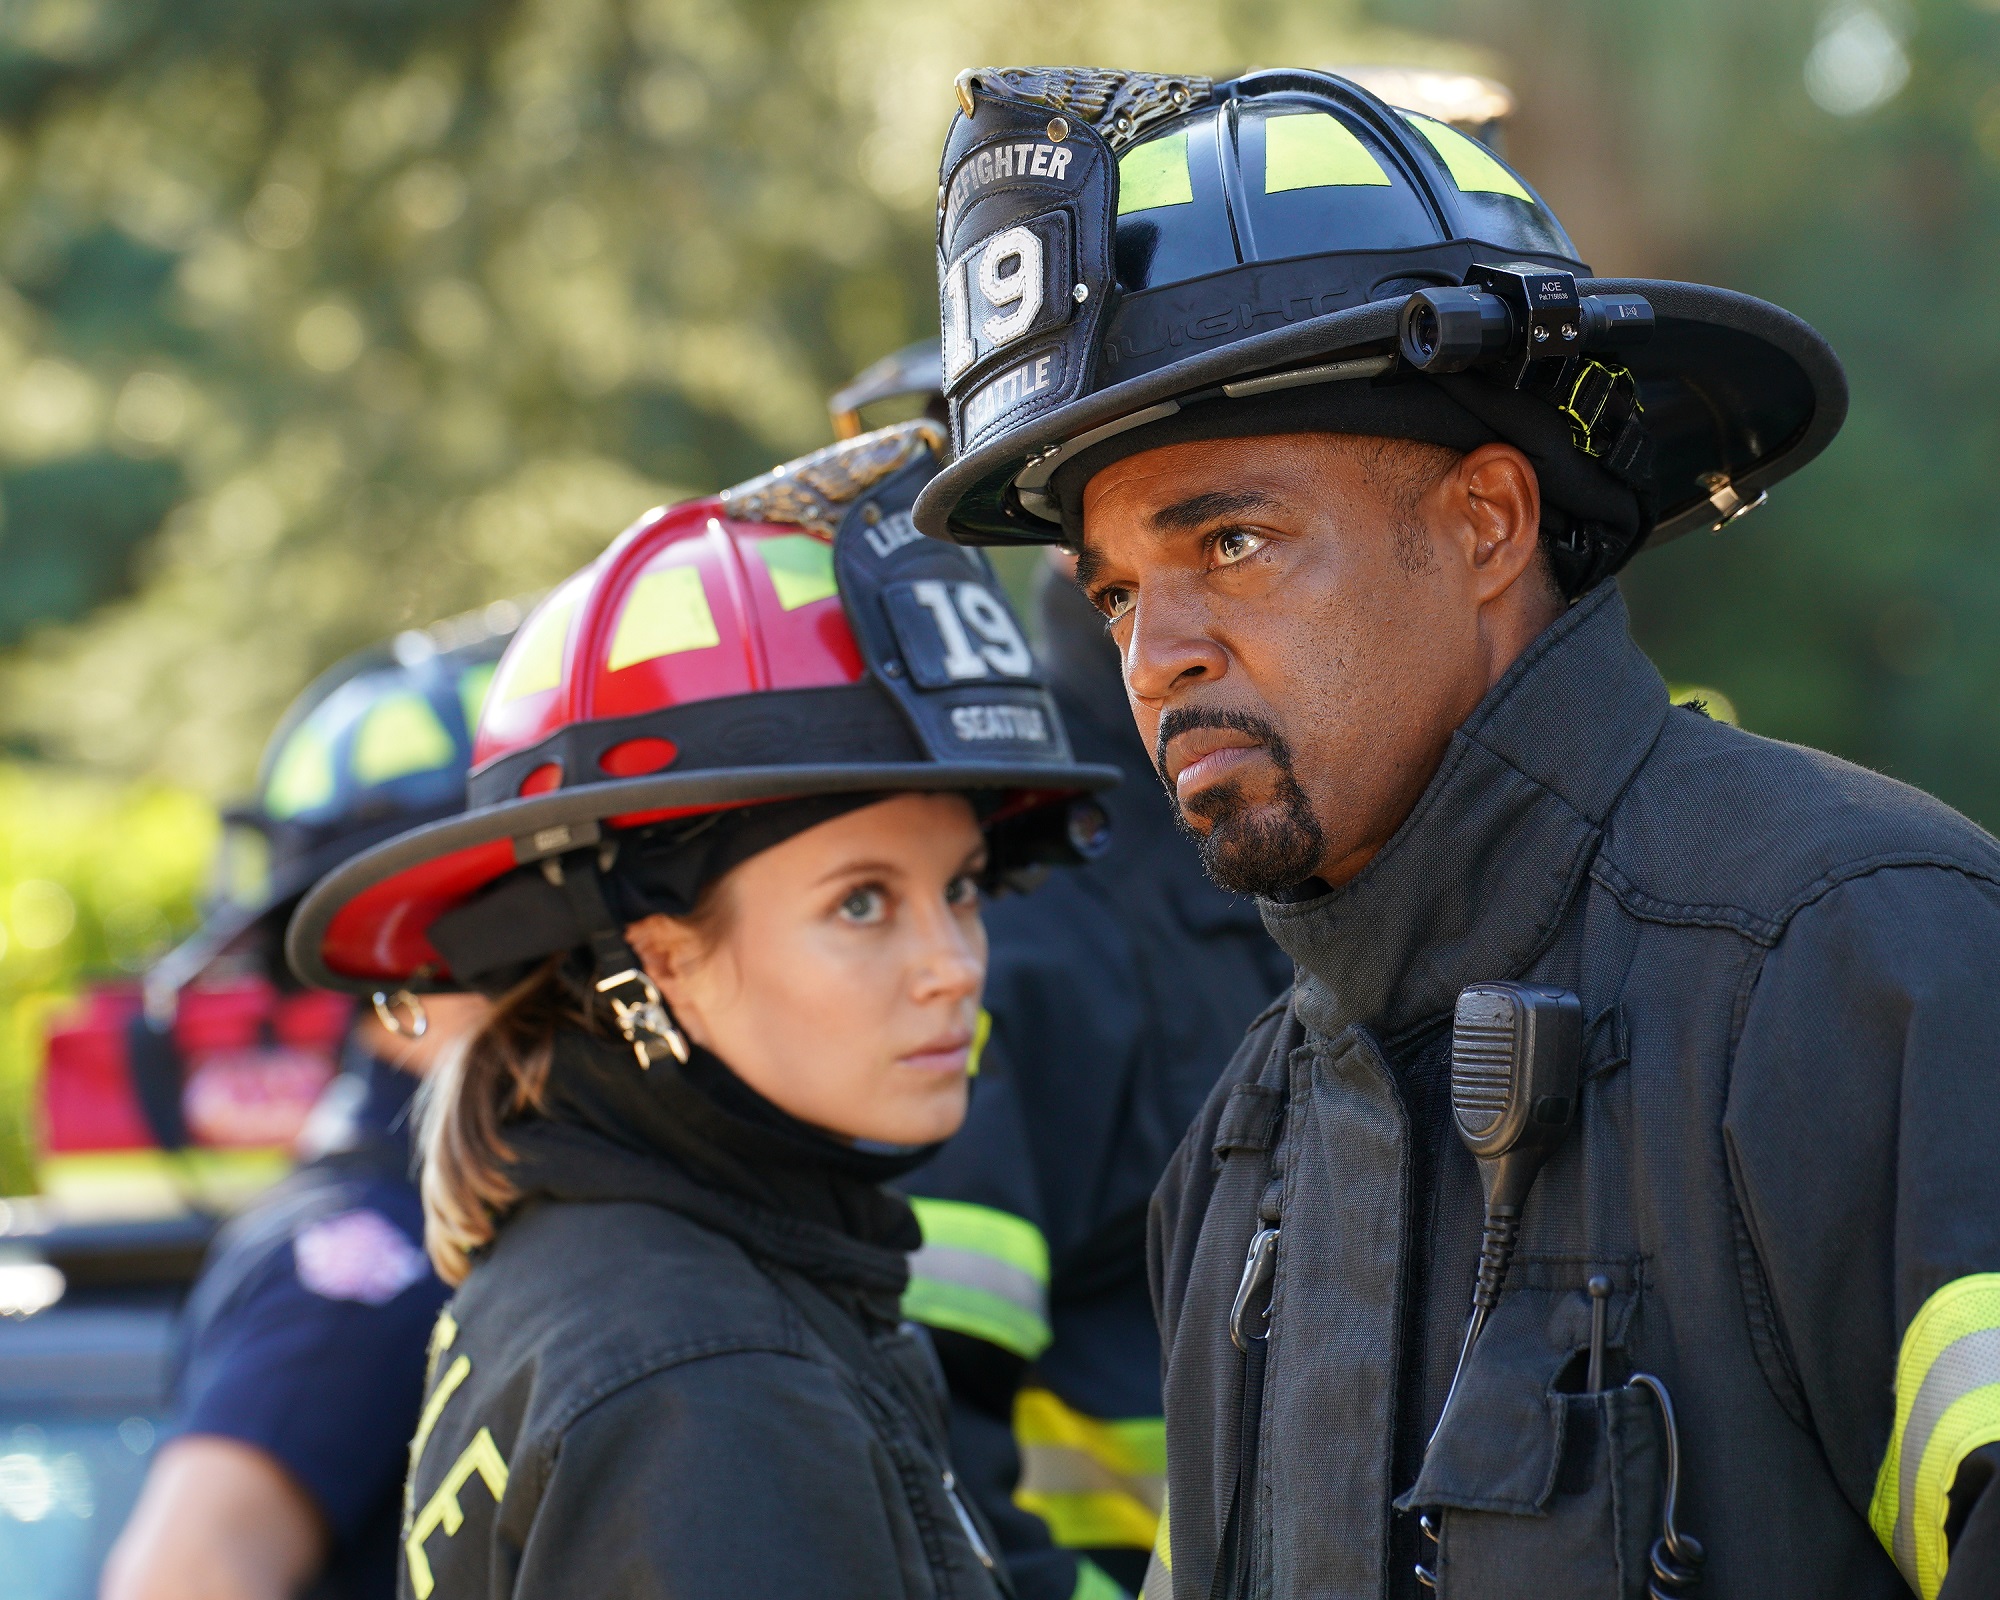 ‘Station 19’ Season 6 Trailer Teases a Natural Disaster Like No Other When It Returns